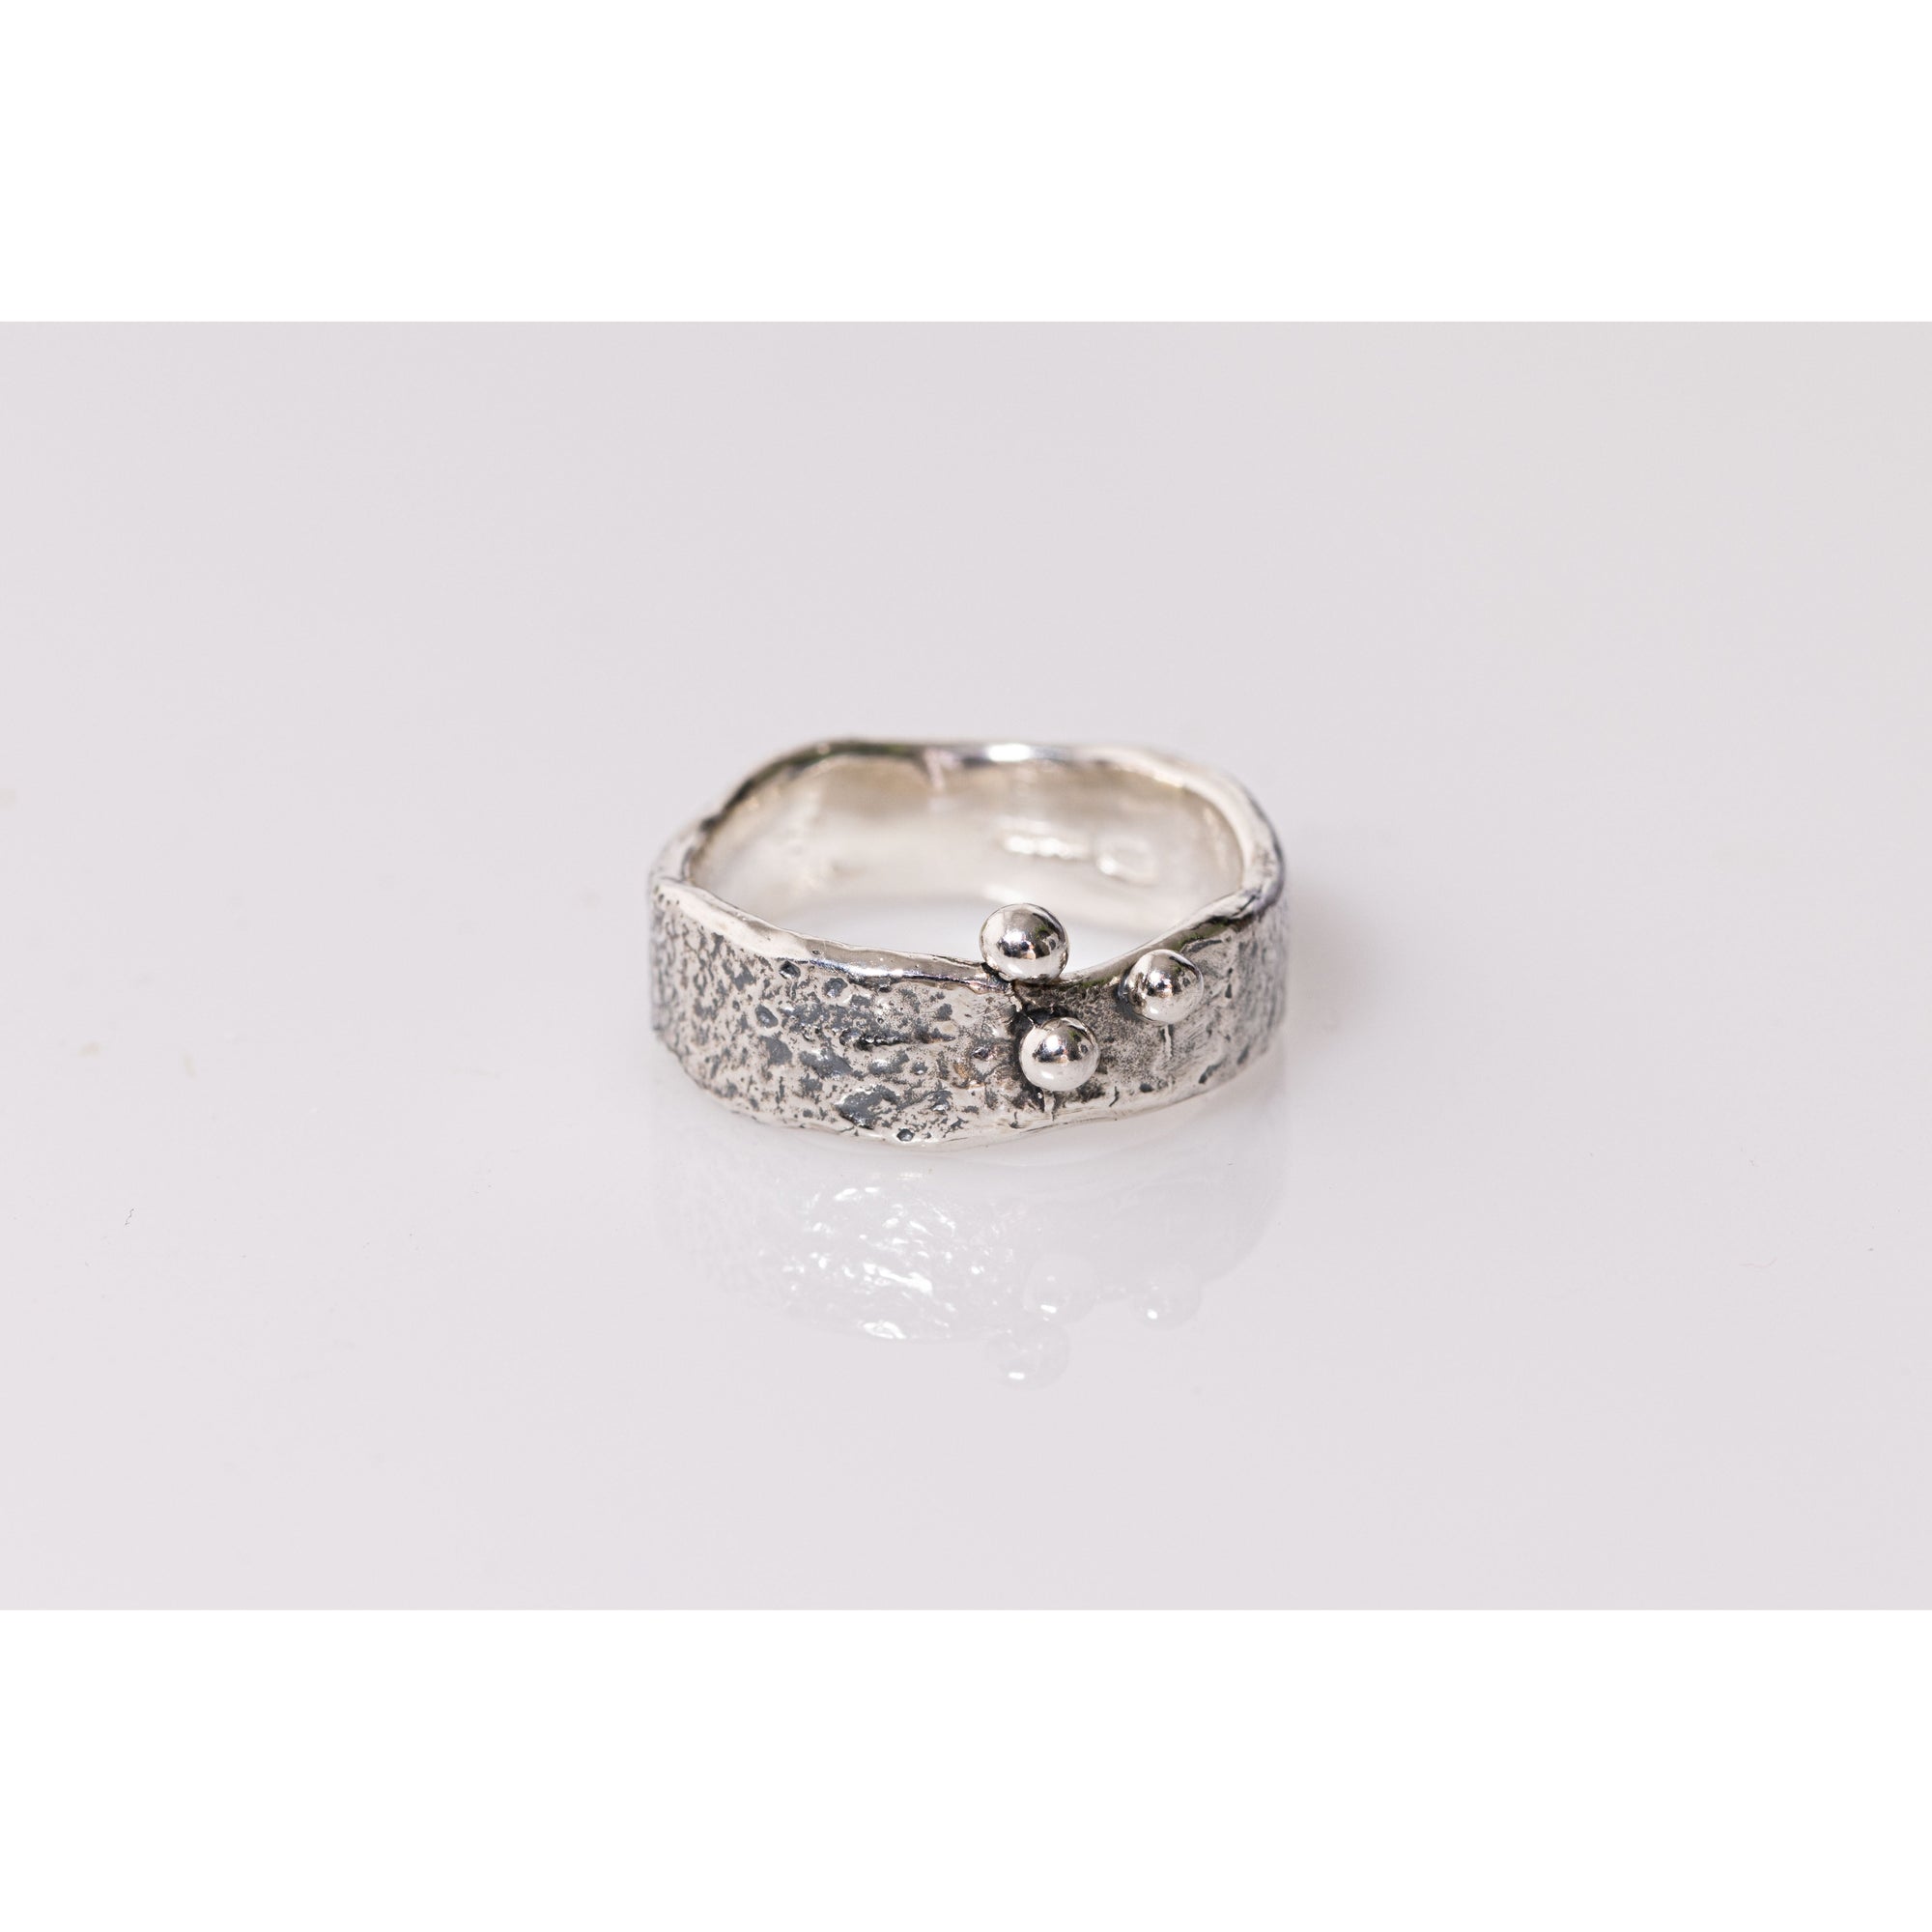 'SA R13 Organic Silver Ring' by Sandra Austin jewellery, available at Padstow Gallery, Cornwall